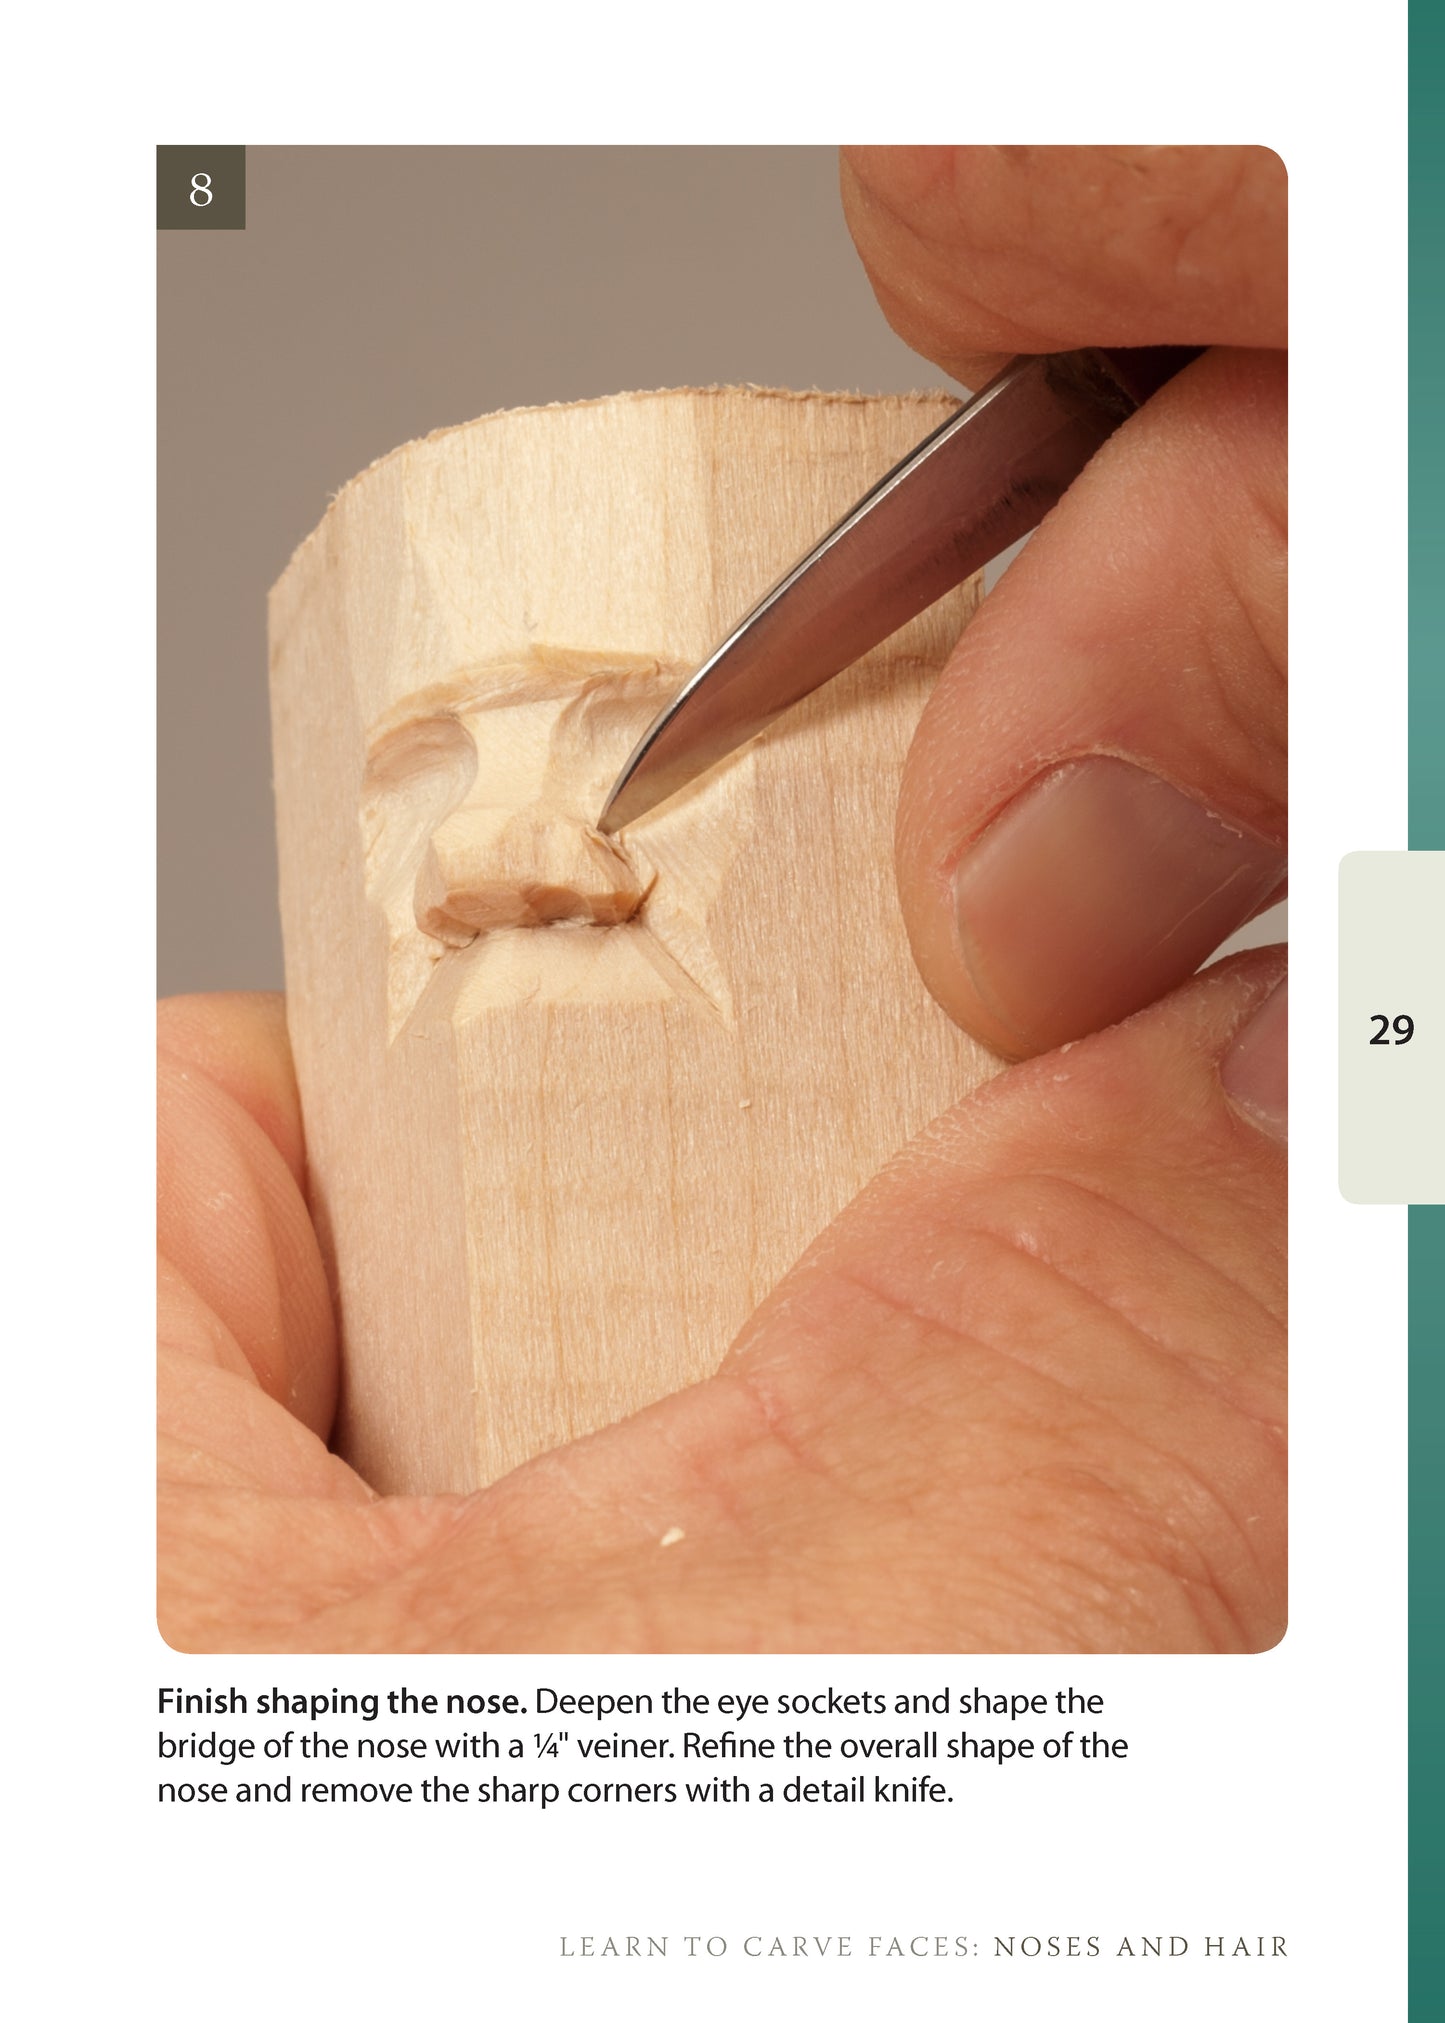 Noses and Hair Study Stick Kit (Learn to Carve Faces with Harold Enlow)